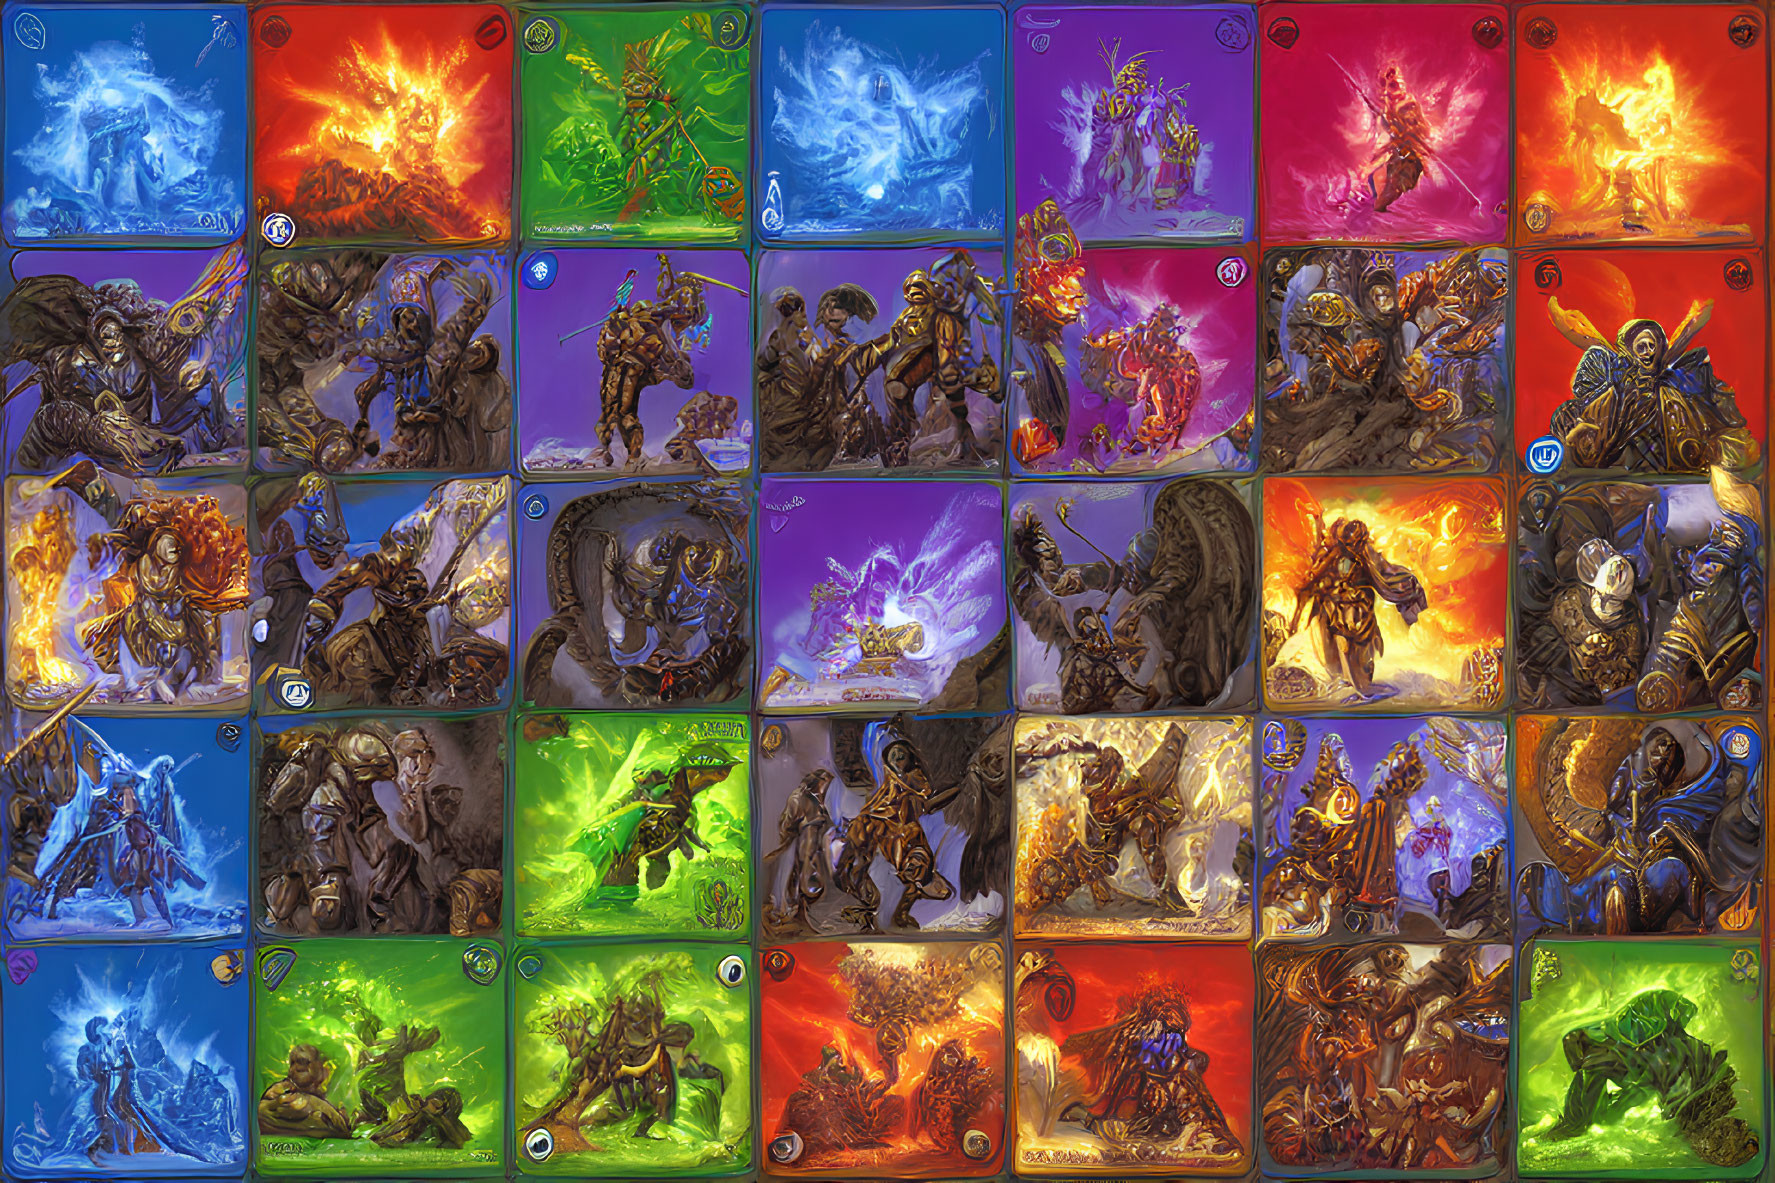 Illustrated Fantasy Creature Cards with Color-Coded Backgrounds